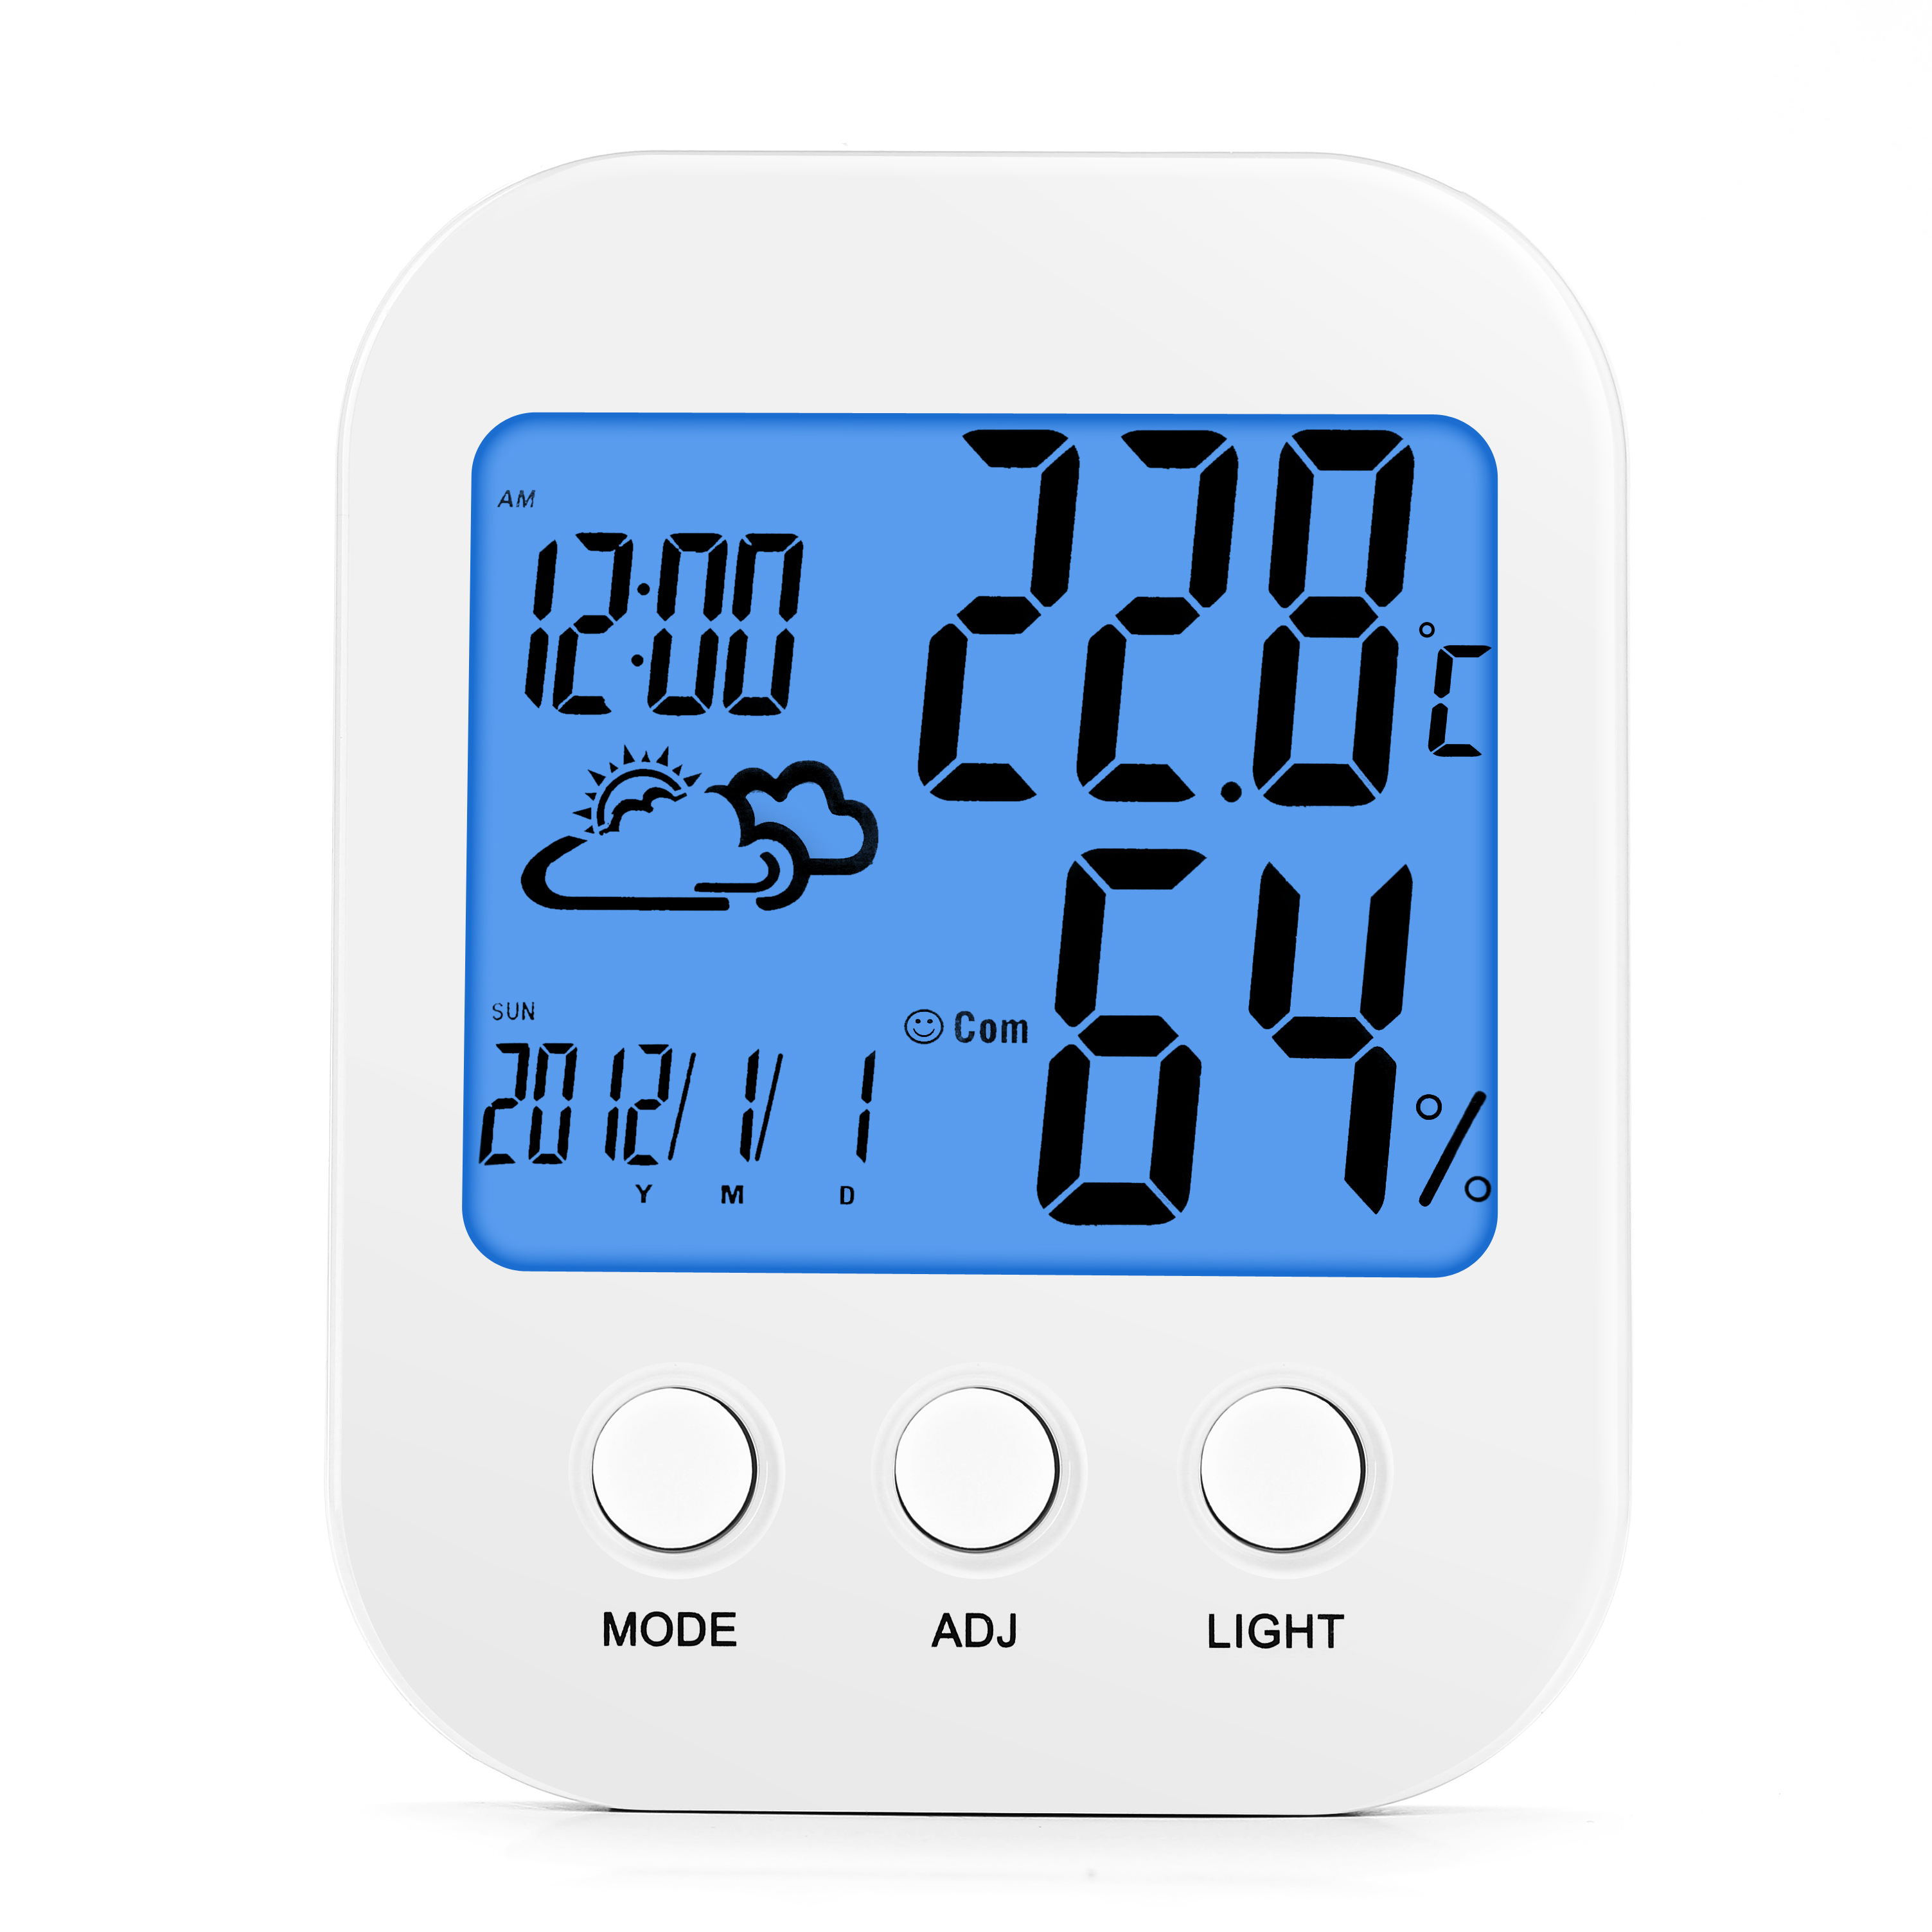 YH-TH202 Digital thermometer / hygrometer Humidity Meter Weather